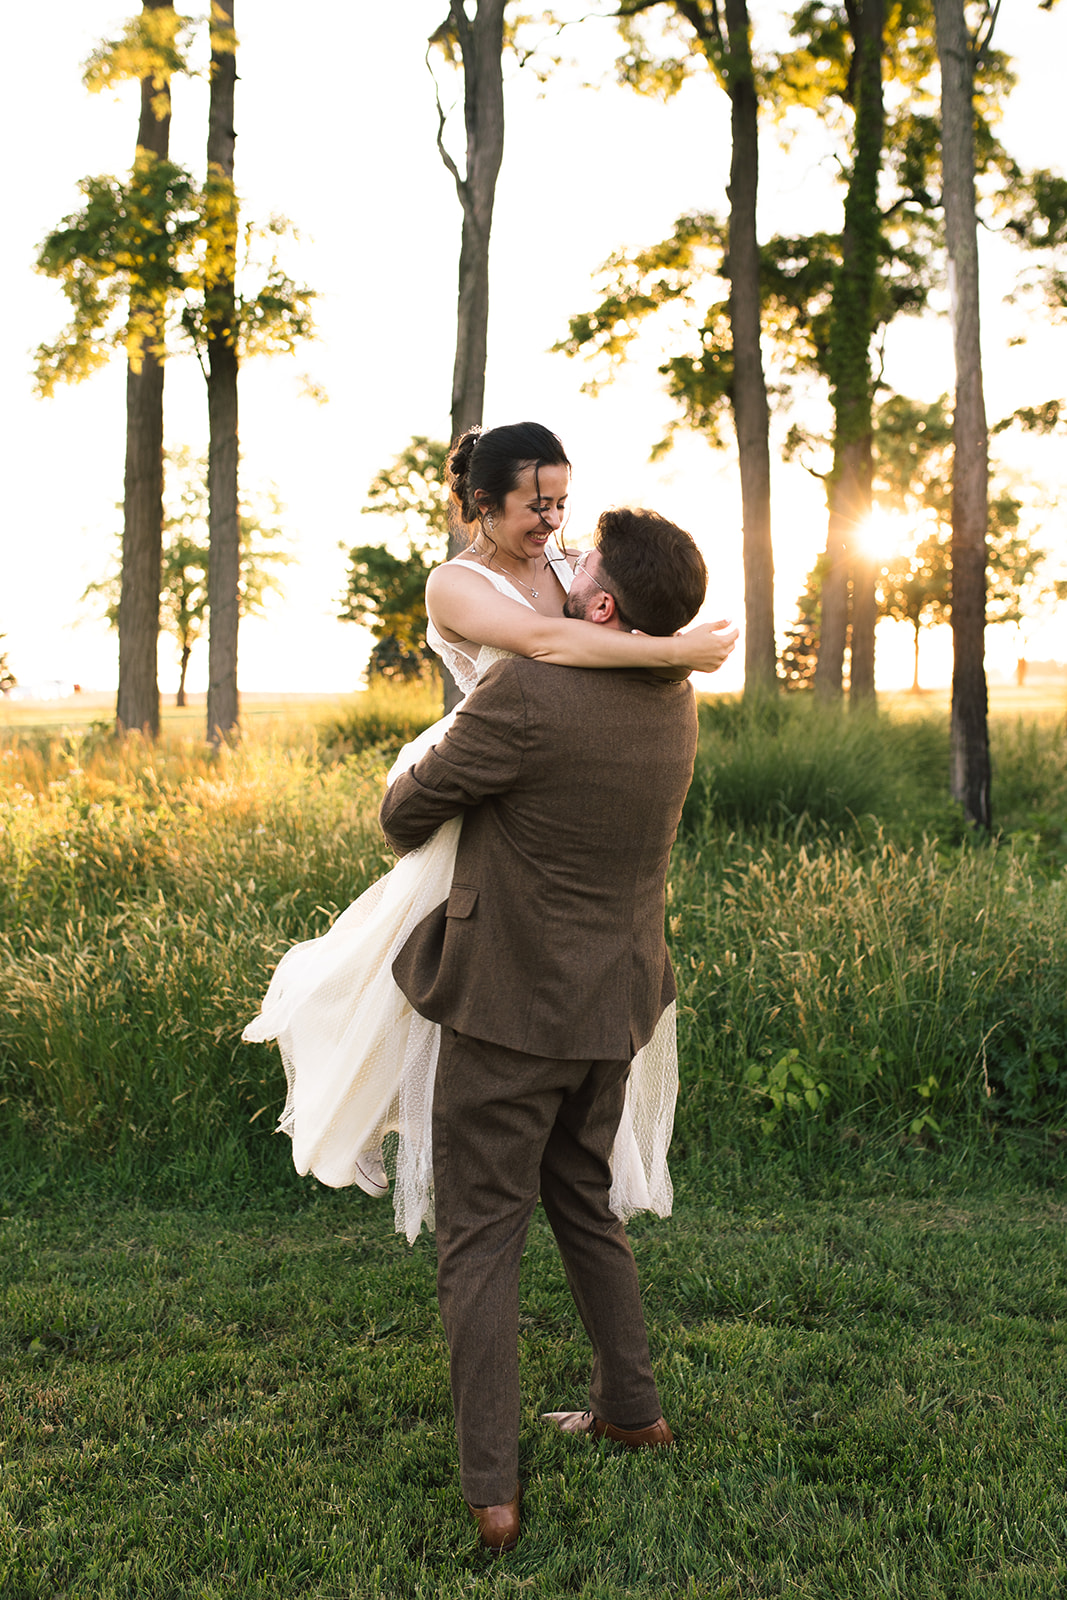 Whimsical couples wedding in a warm pasture in northeast ohio